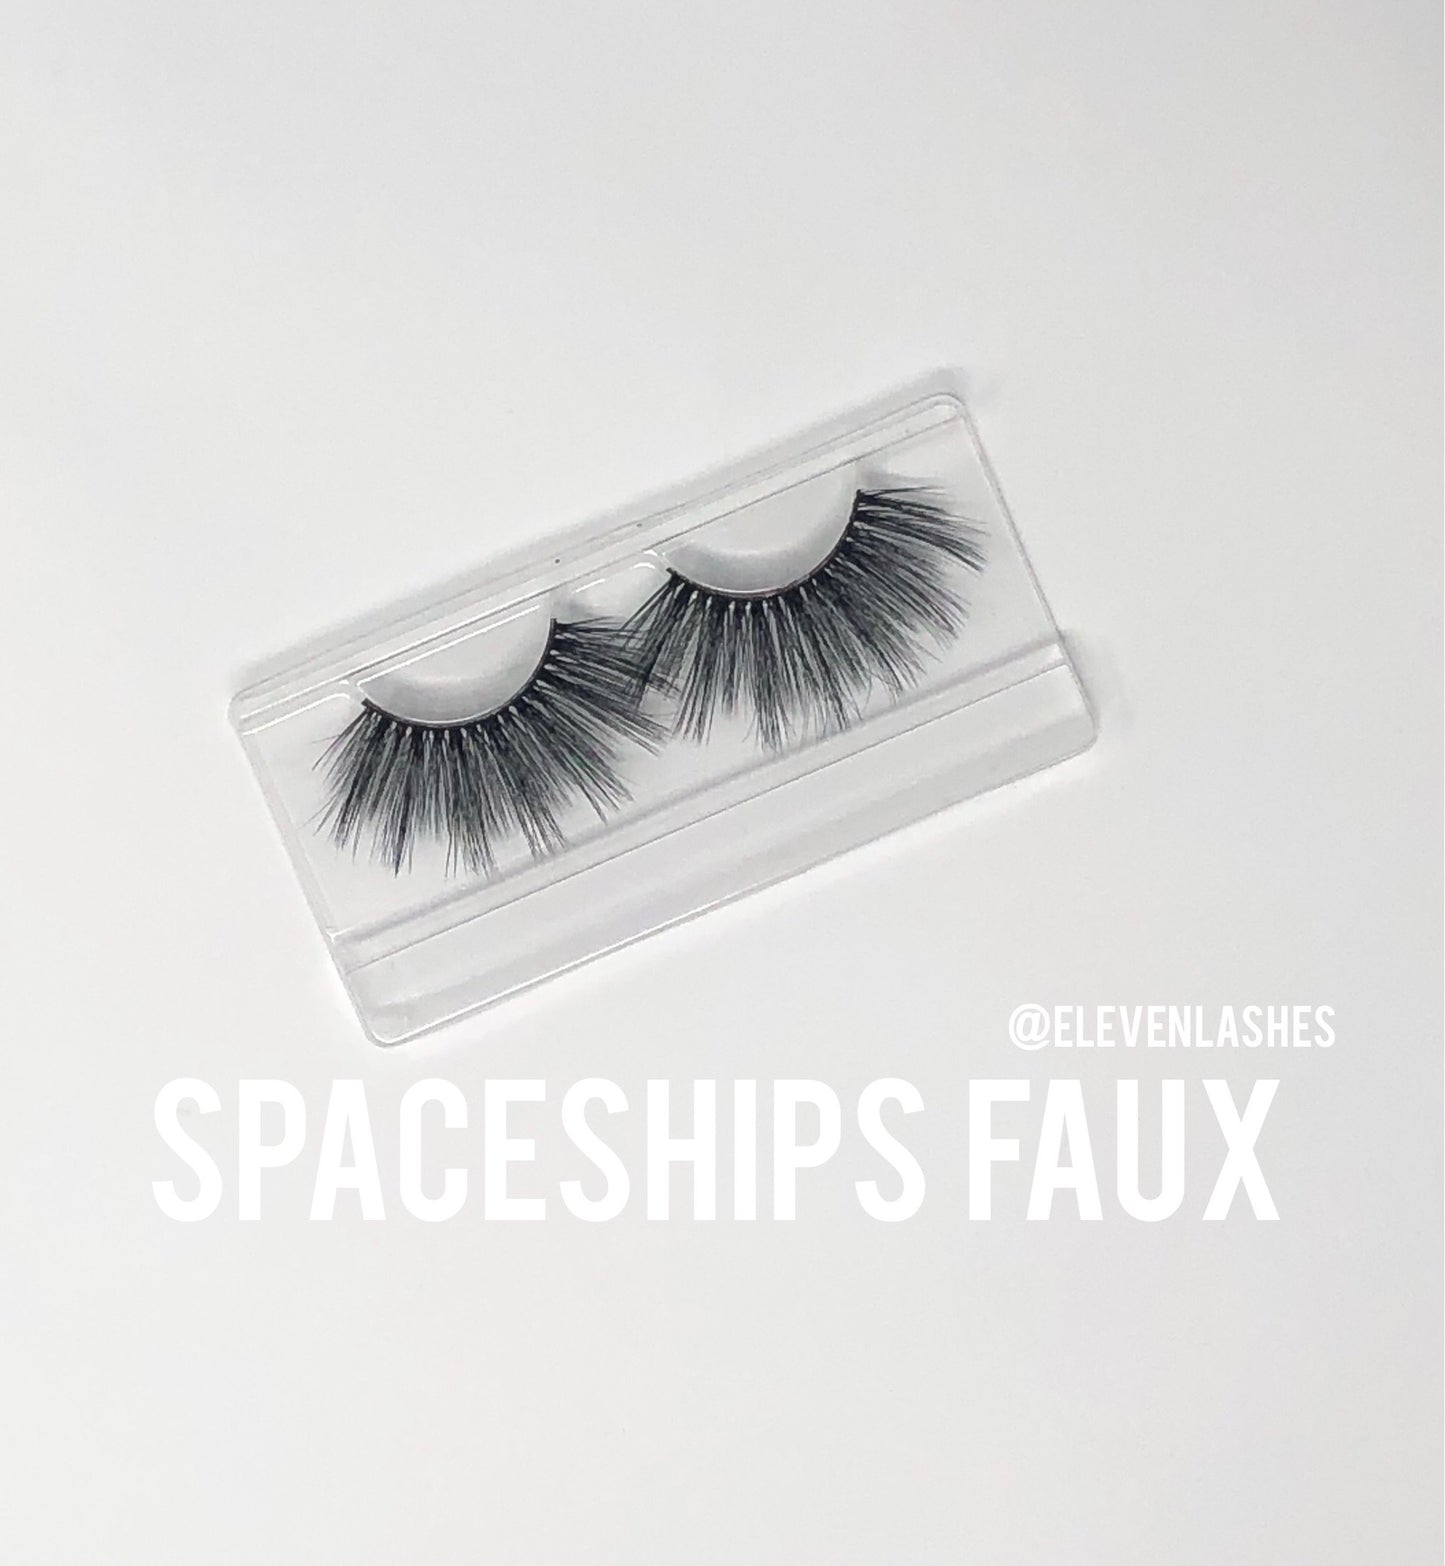 Spaceships Faux